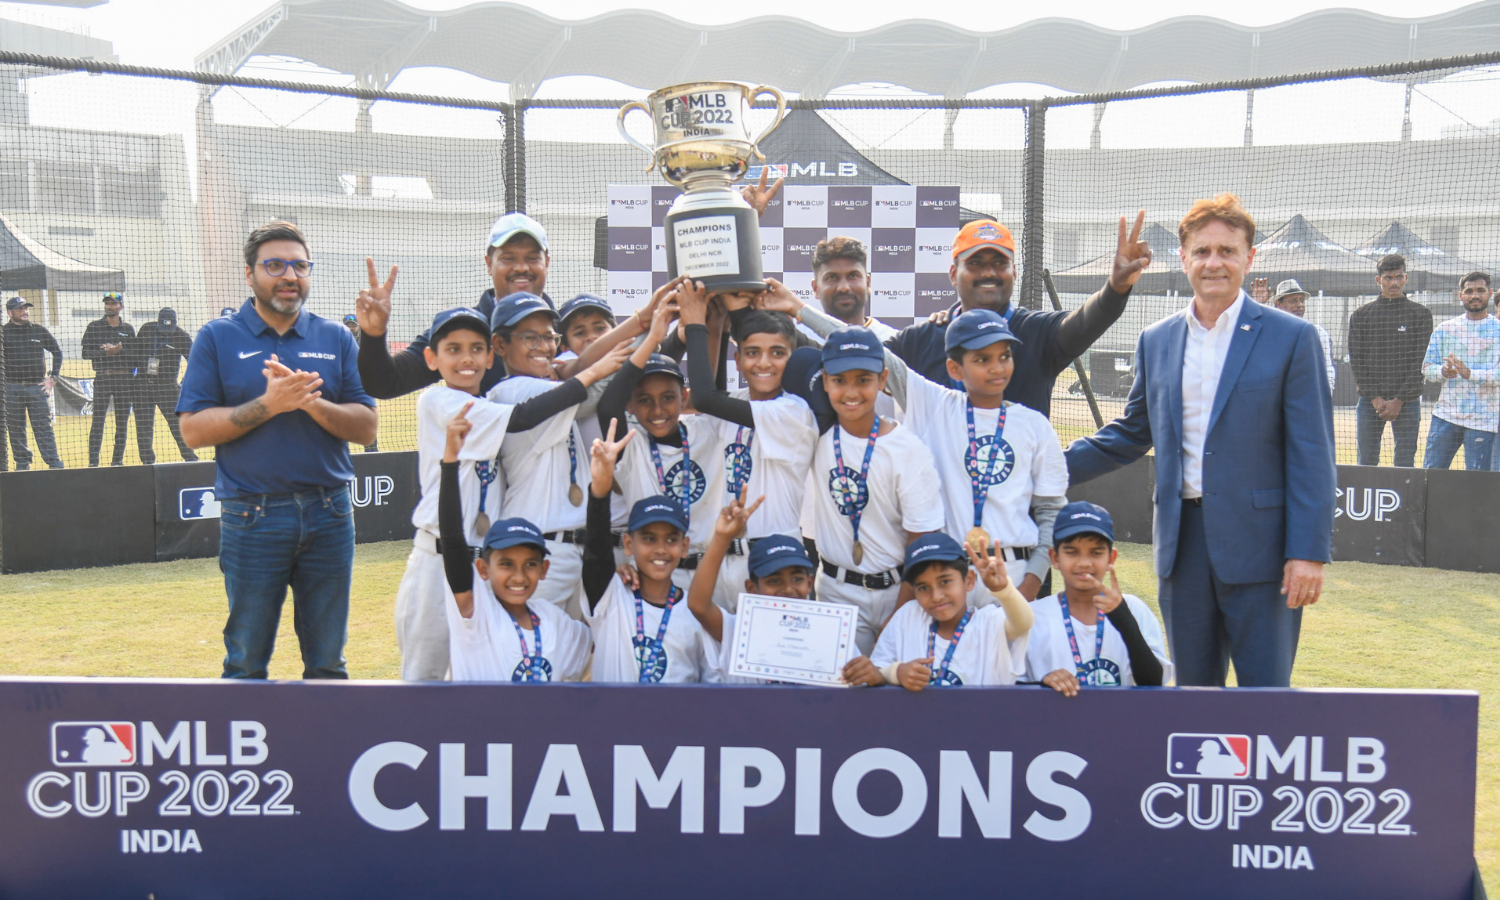 Pune Mariners defeat Satara Blue Jays in a thrilling final to win MLB Cup  India 2022